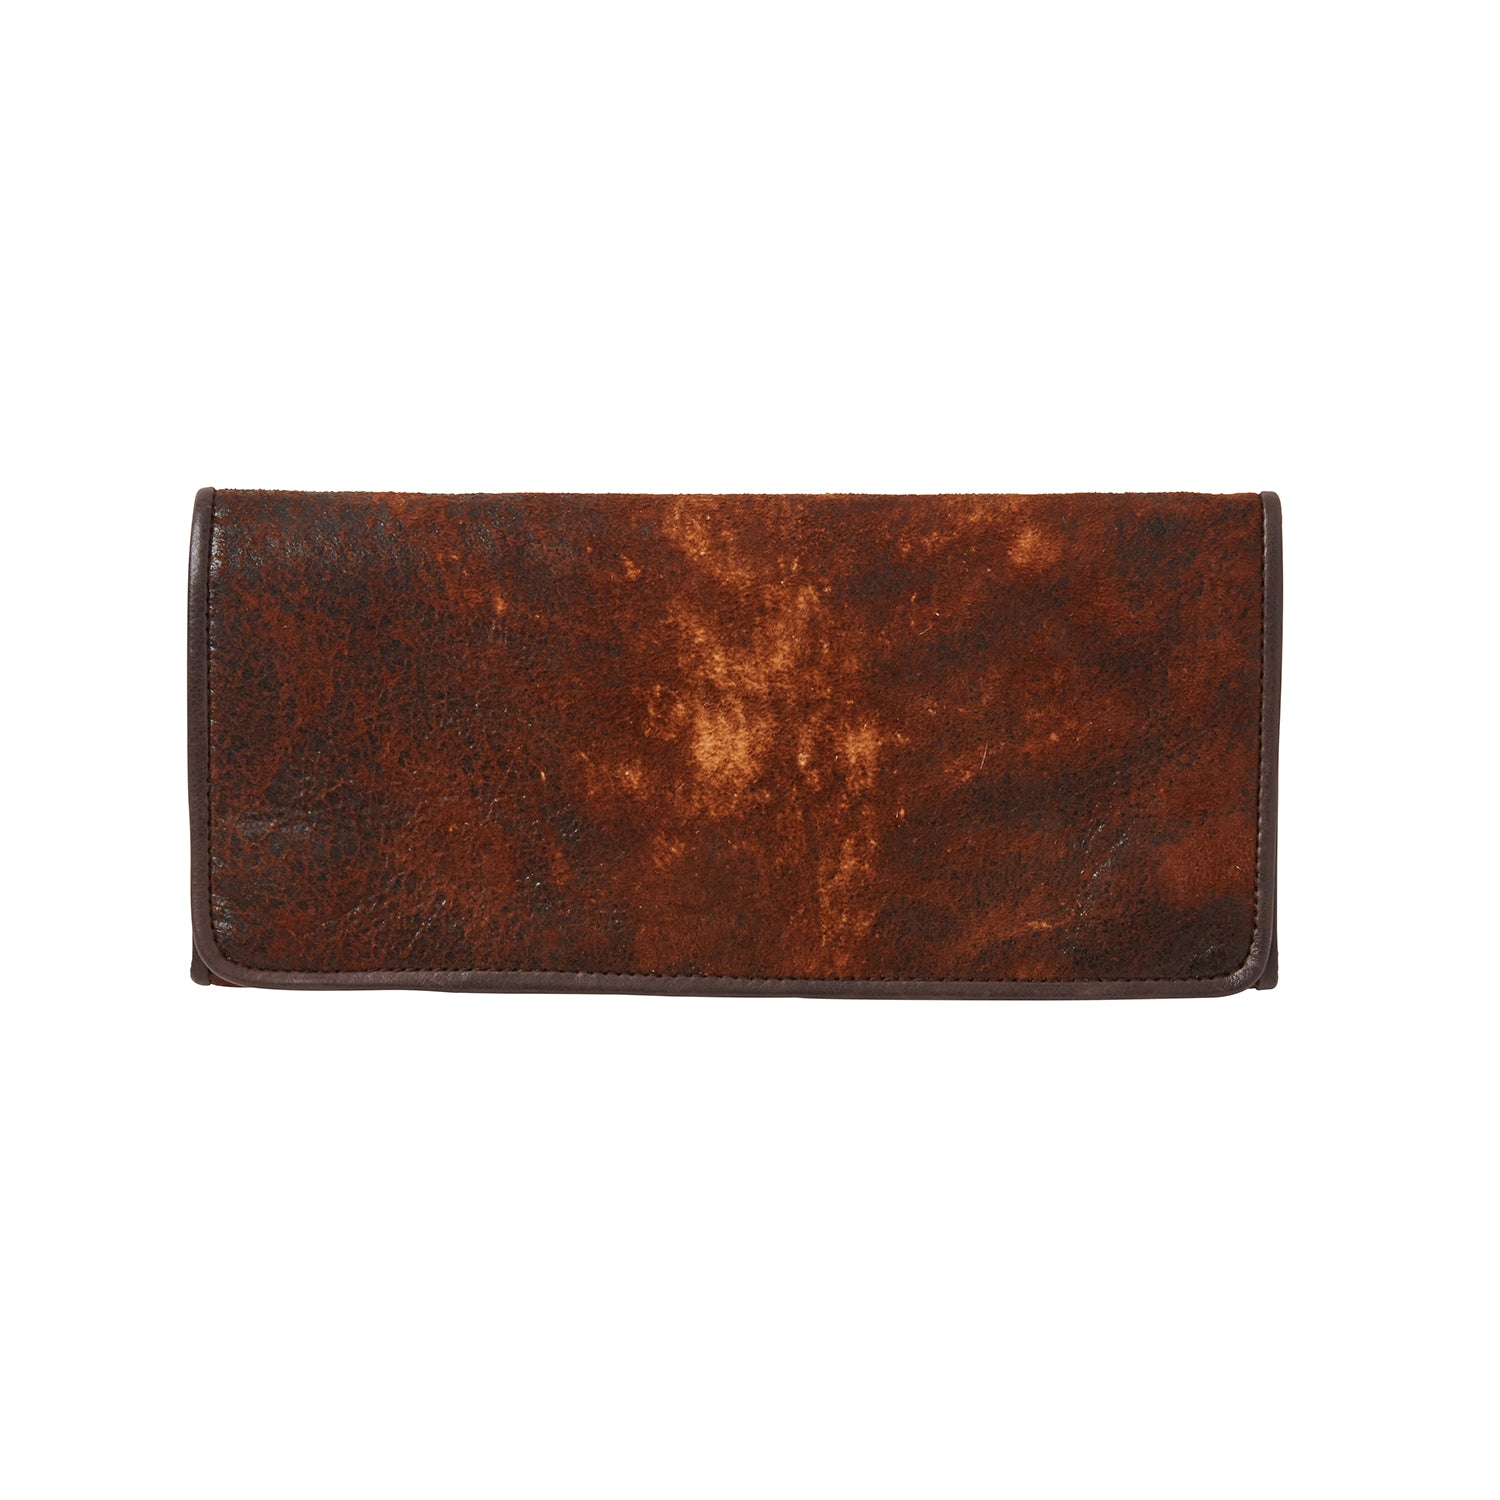 Wallet By Louis Vuitton Size: Large